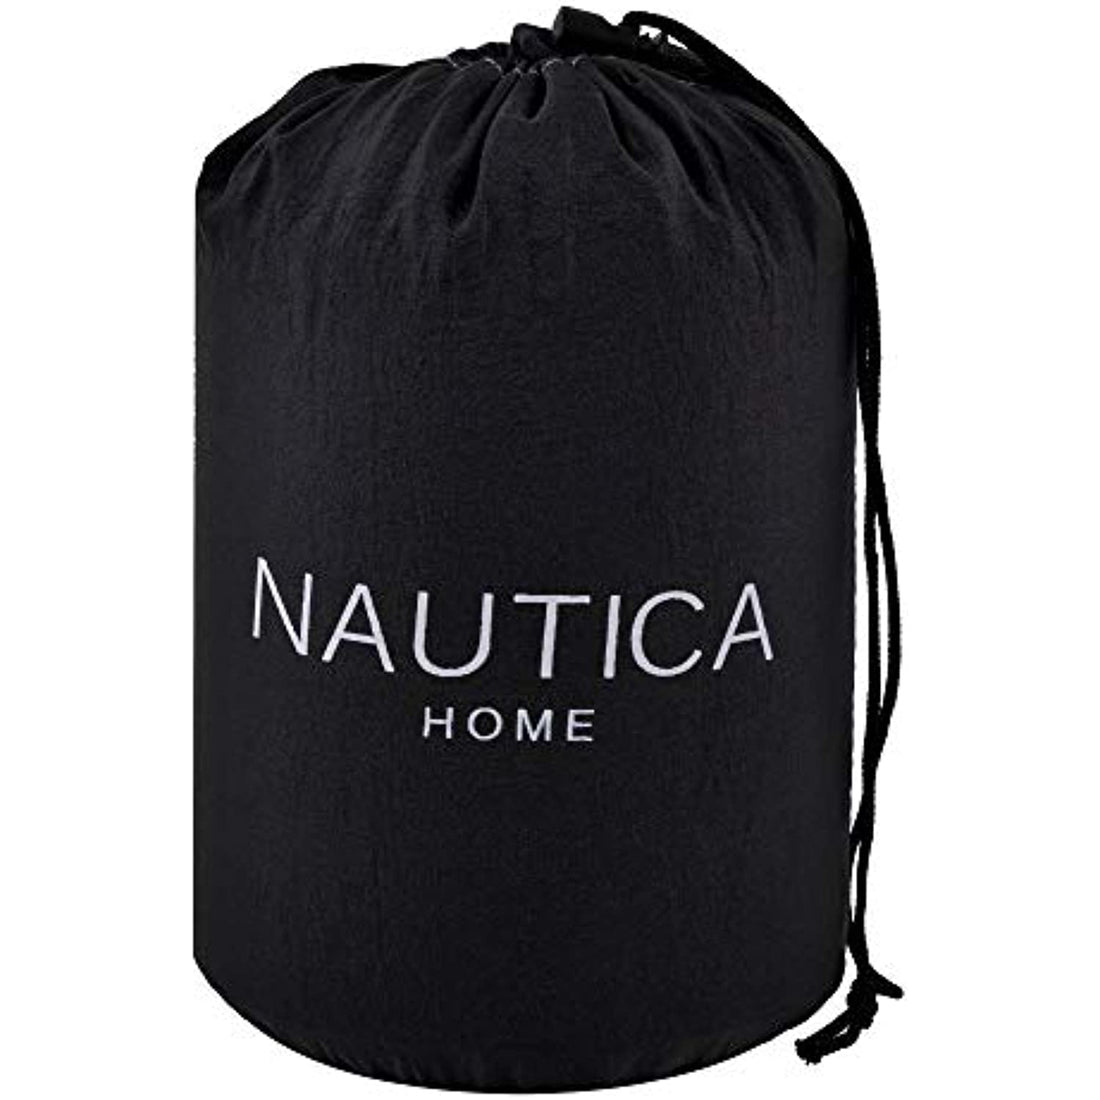 Nautica Portable Camping Hammock 1-2Person Kids or Adults with Straps, Caribiners & Bag for Travel/Backpacking/Hiking/Backyard/Lawn, Black Beauty/Dark Grey, Small